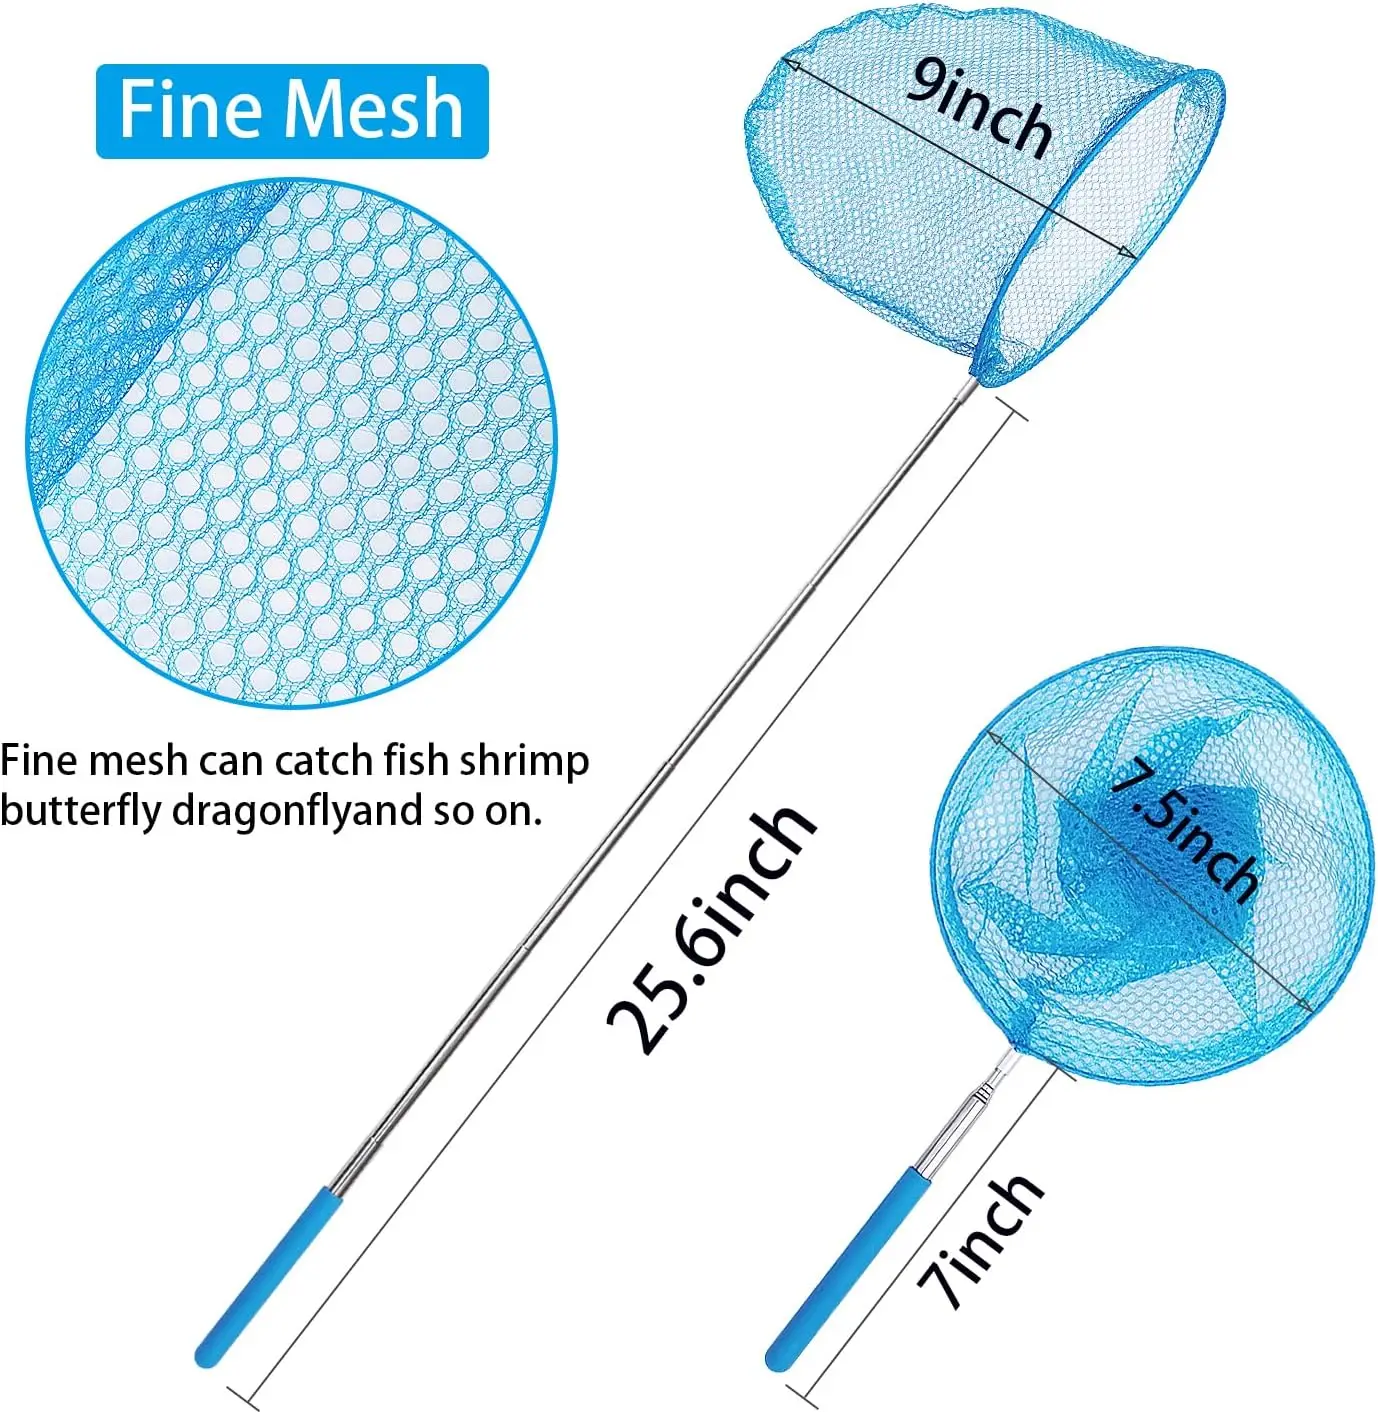 Mini Fishing Net Colorful Anti-Slip Grip Pole Telescopic Butterfly Net Extendable For Kids Catching Bugs Insect Fishing Toy